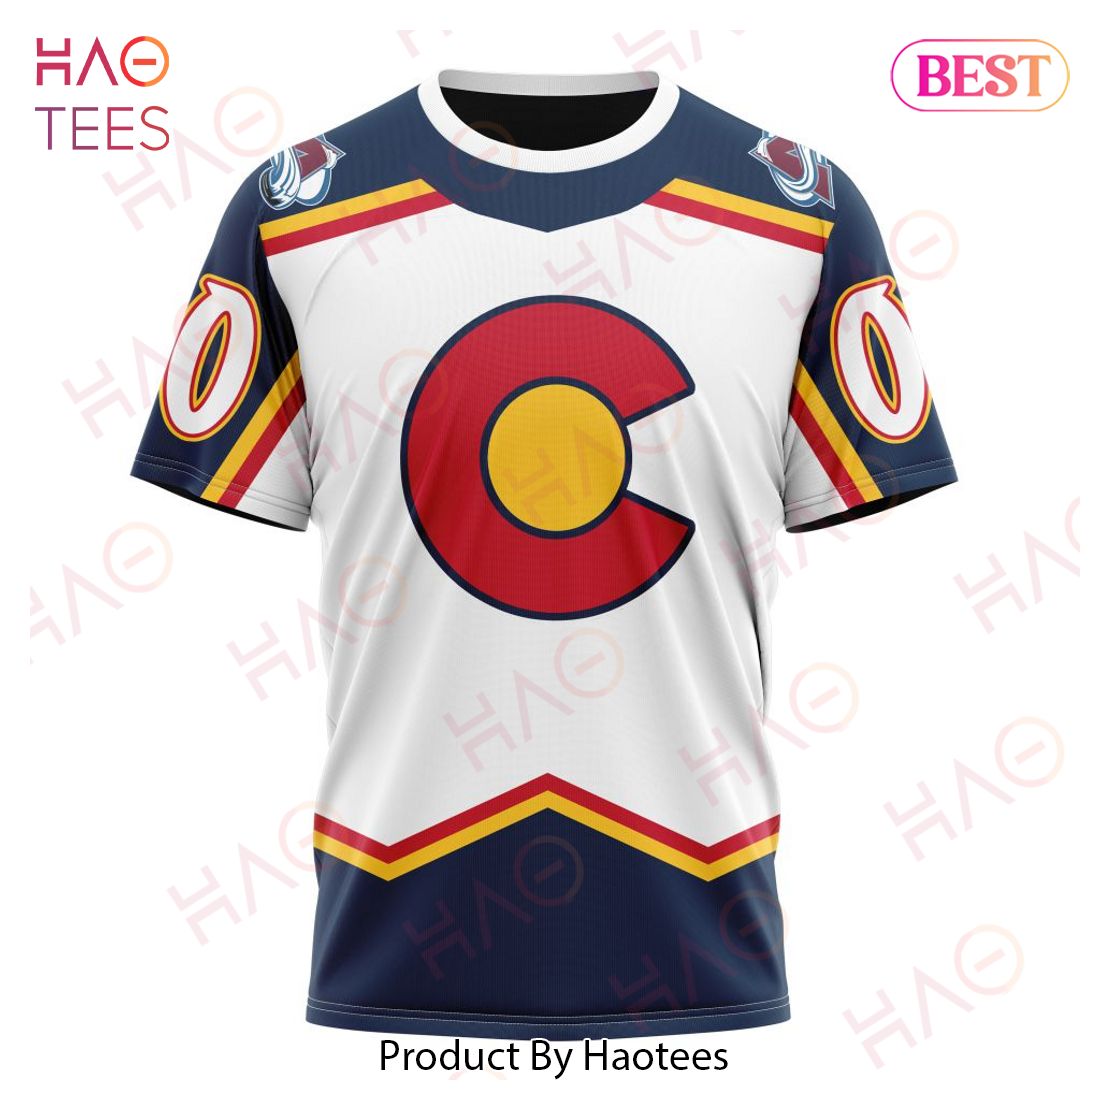 Colorado Avalanche - These Reverse Retros are something special